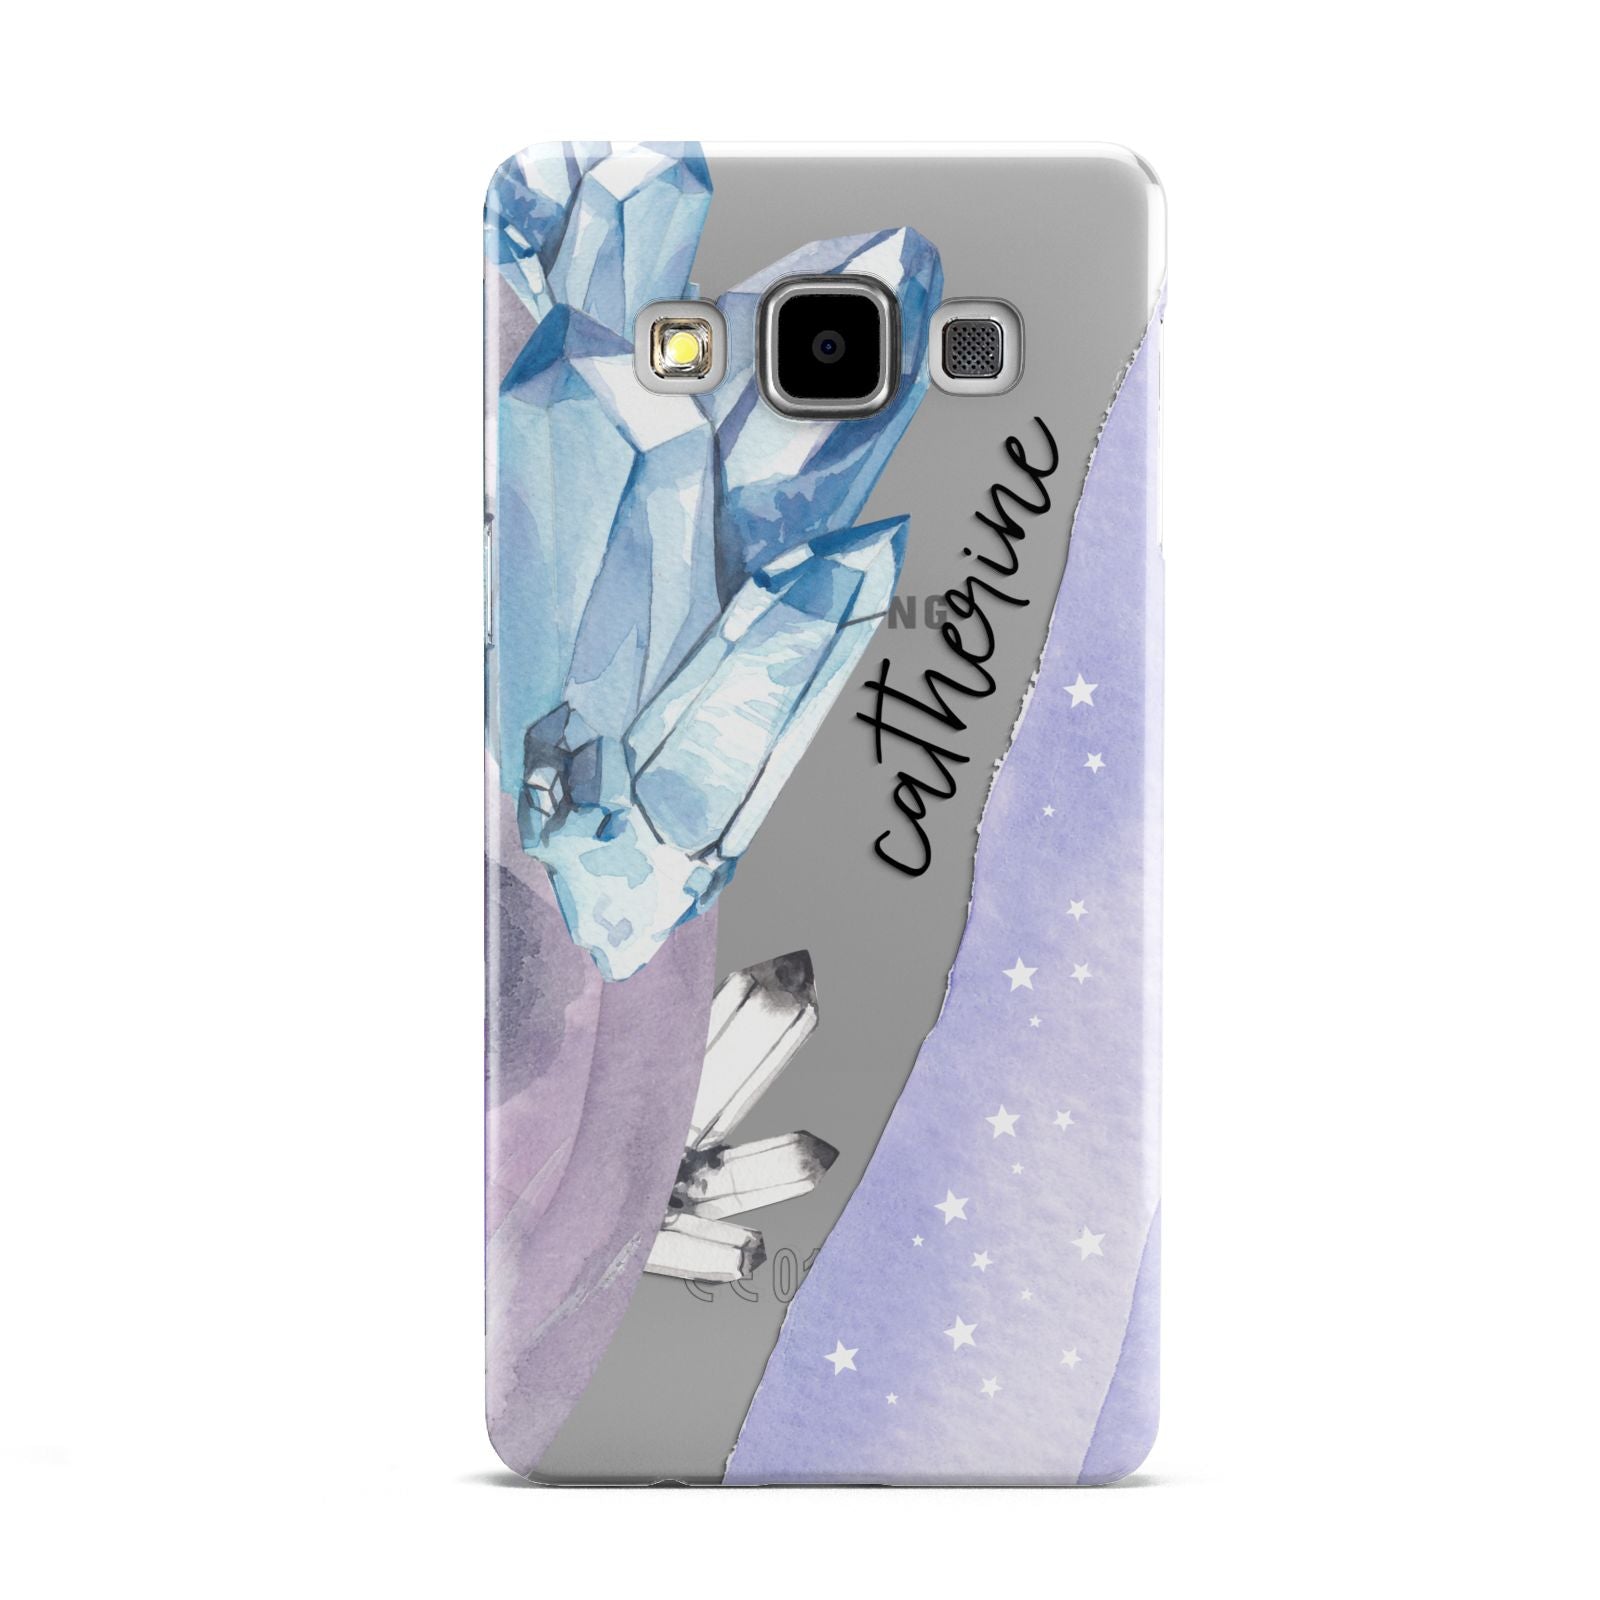 Crystals Personalised Name Samsung Galaxy A5 Case